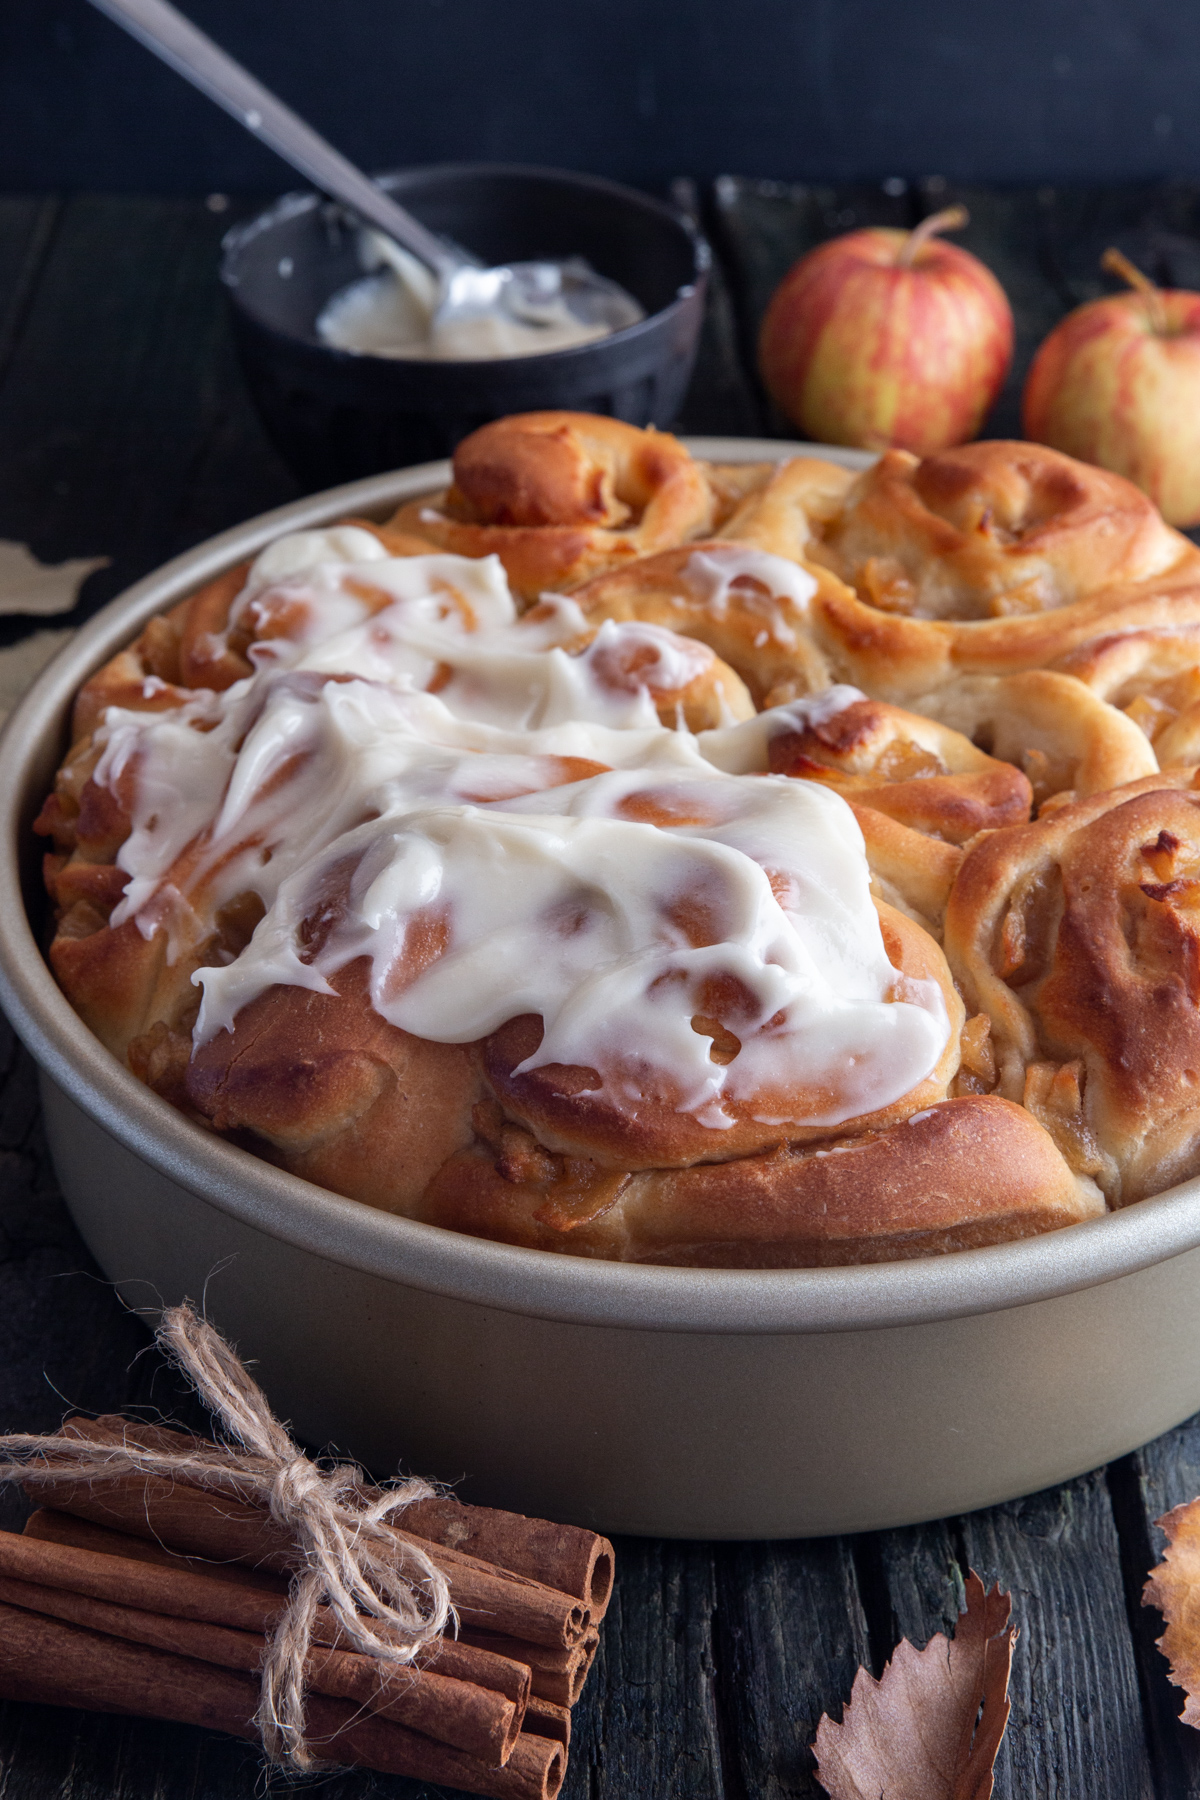 Apple cinnamon rolls with icing on top in a silver pan.